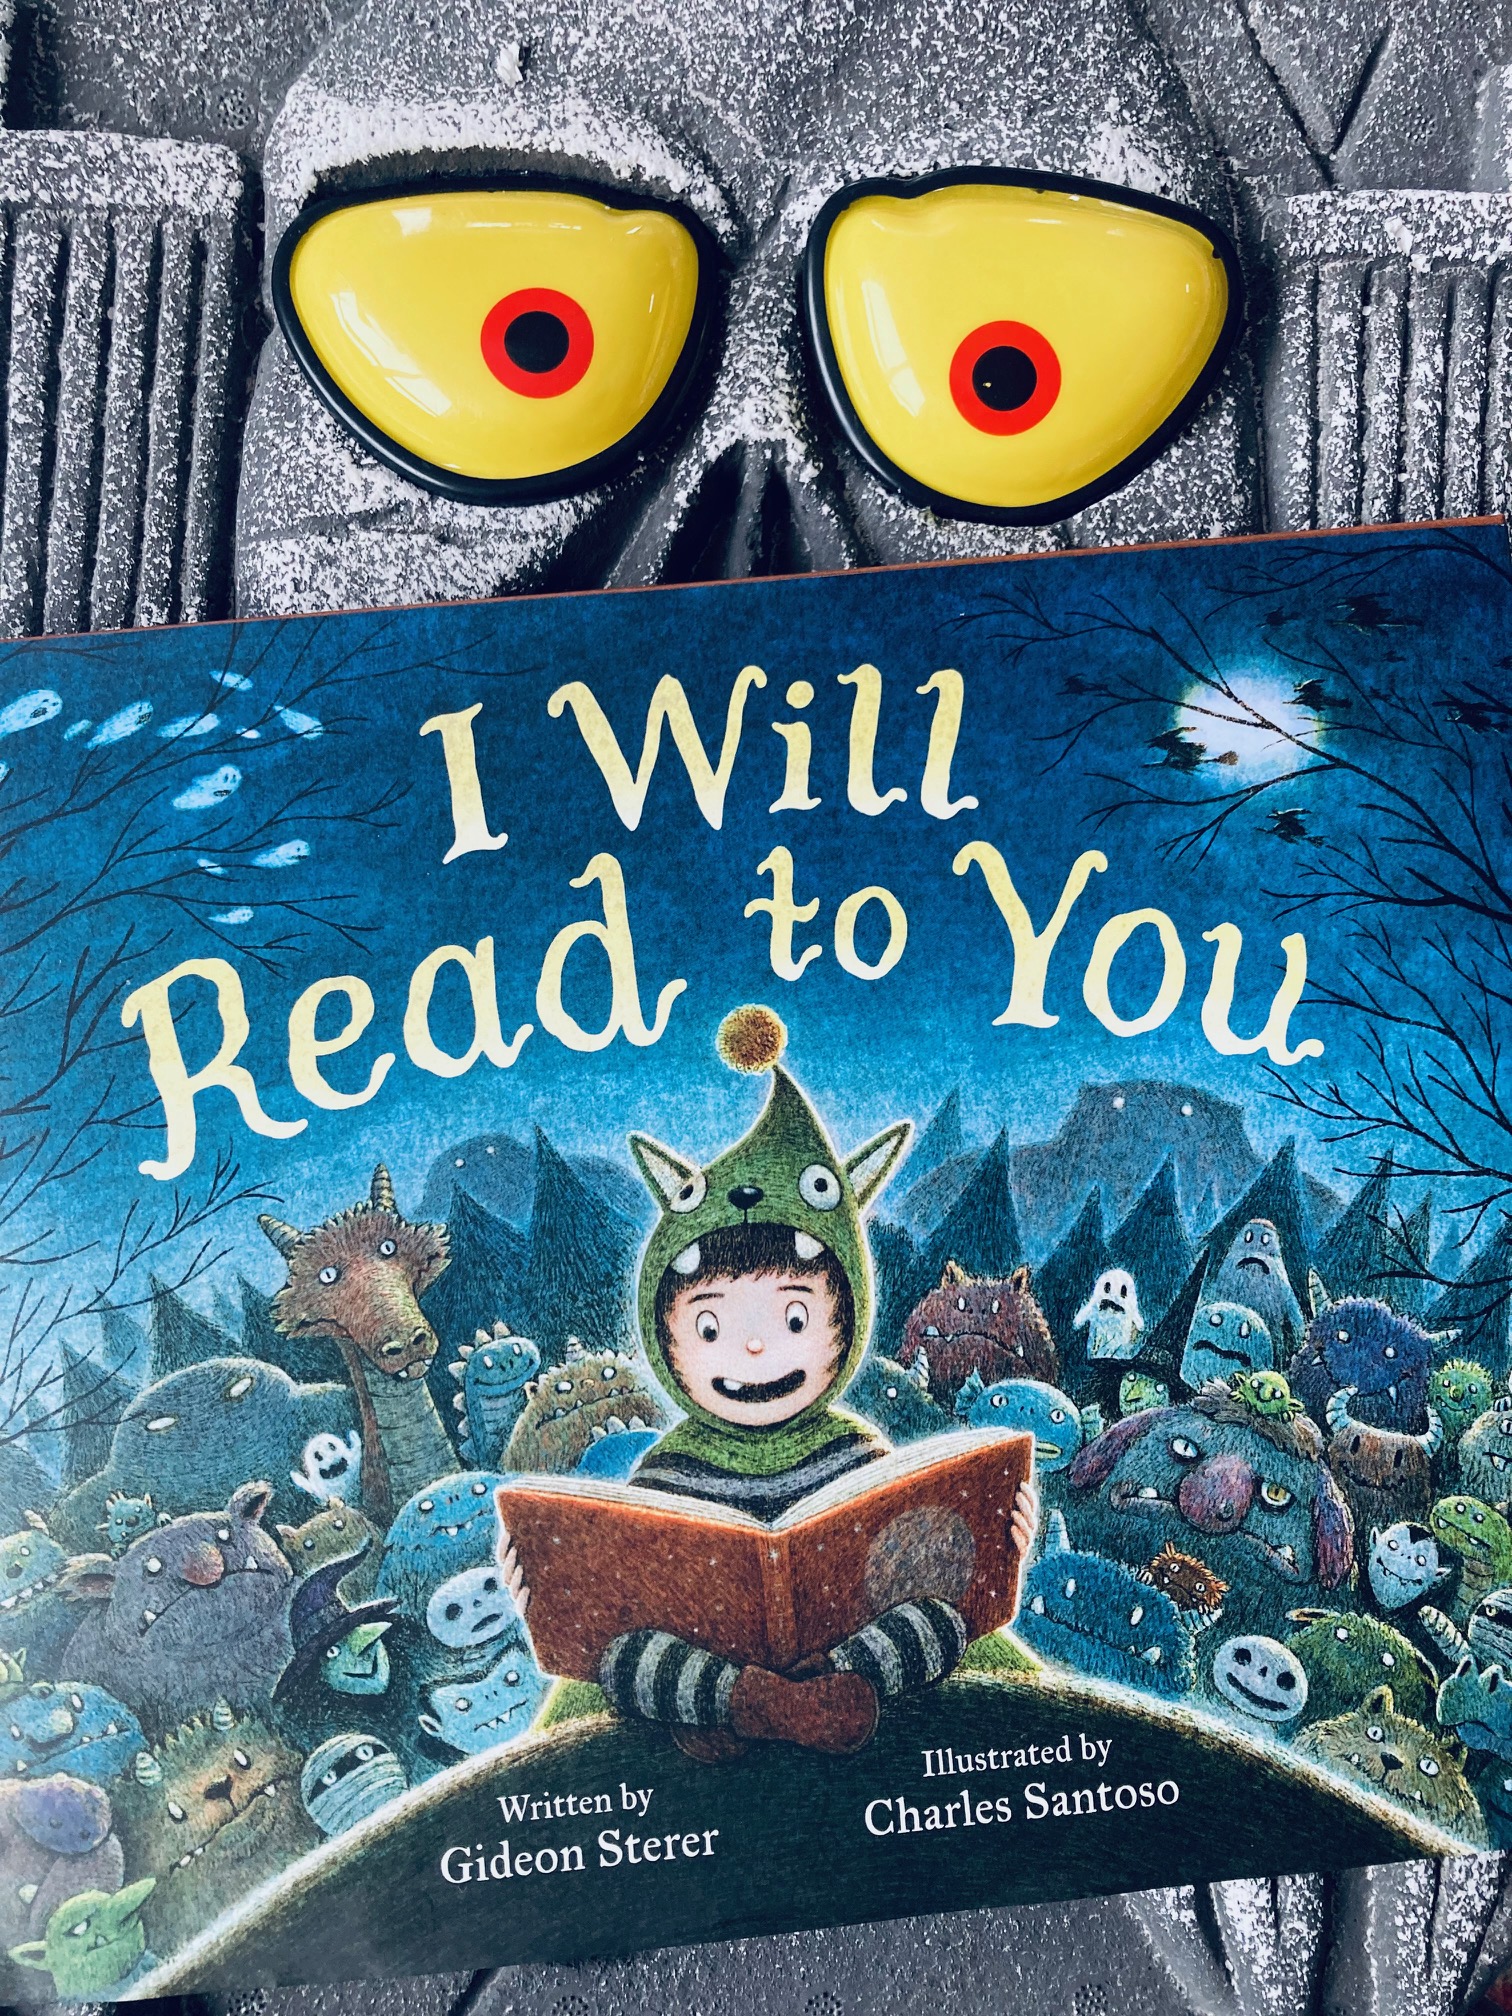 I Will Read to You by Gideon Sterer and Charles Santoso